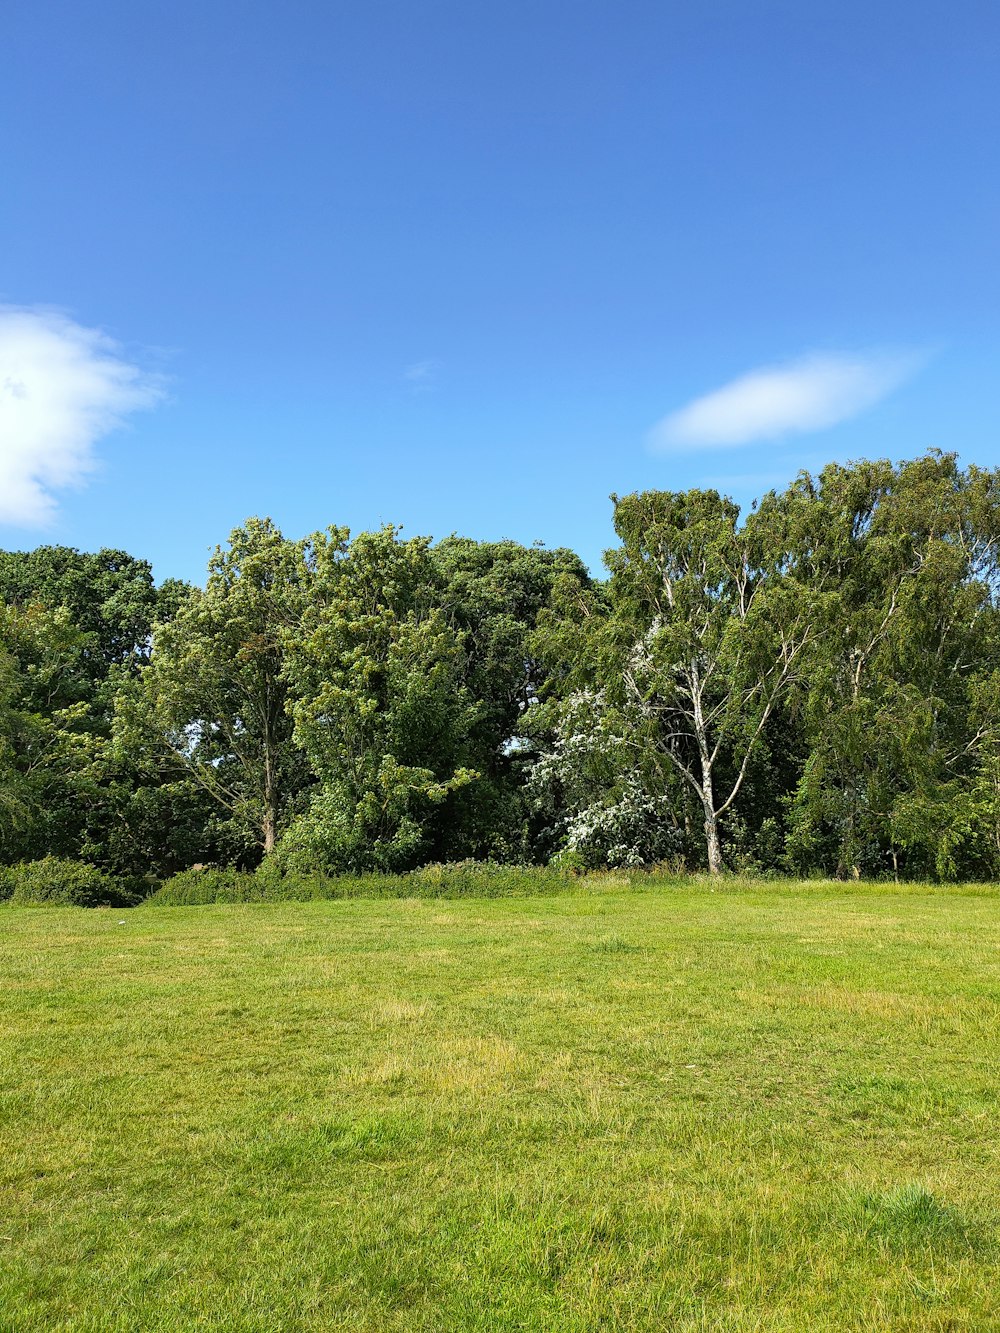 green grass field with green trees under blue sky during daytime